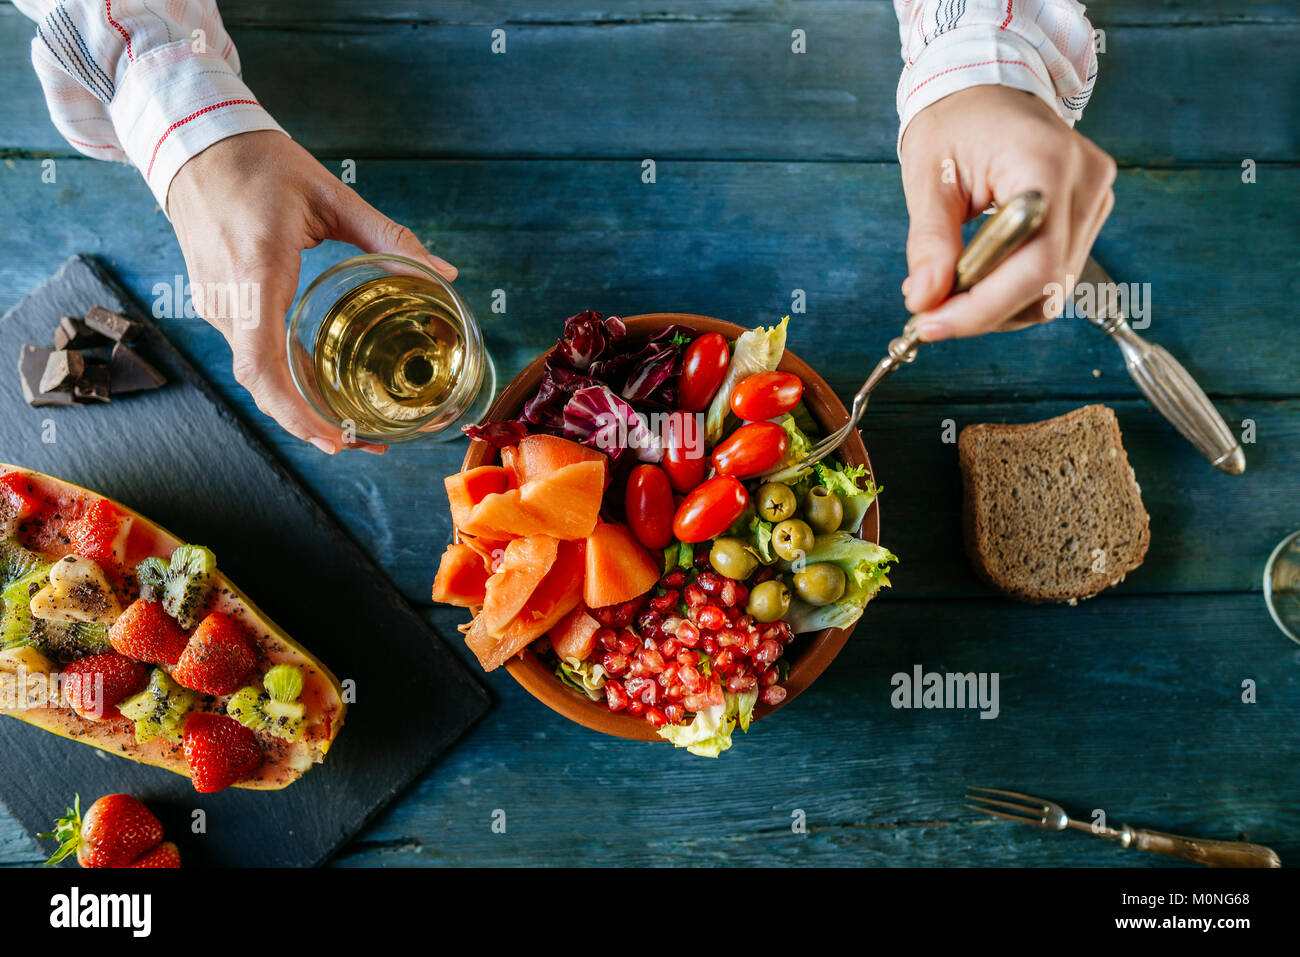 Close-up of woman's hands eating salad wit tomato, pomegranate, papaya and olives, papaya with fruits and with wine glass Stock Photo